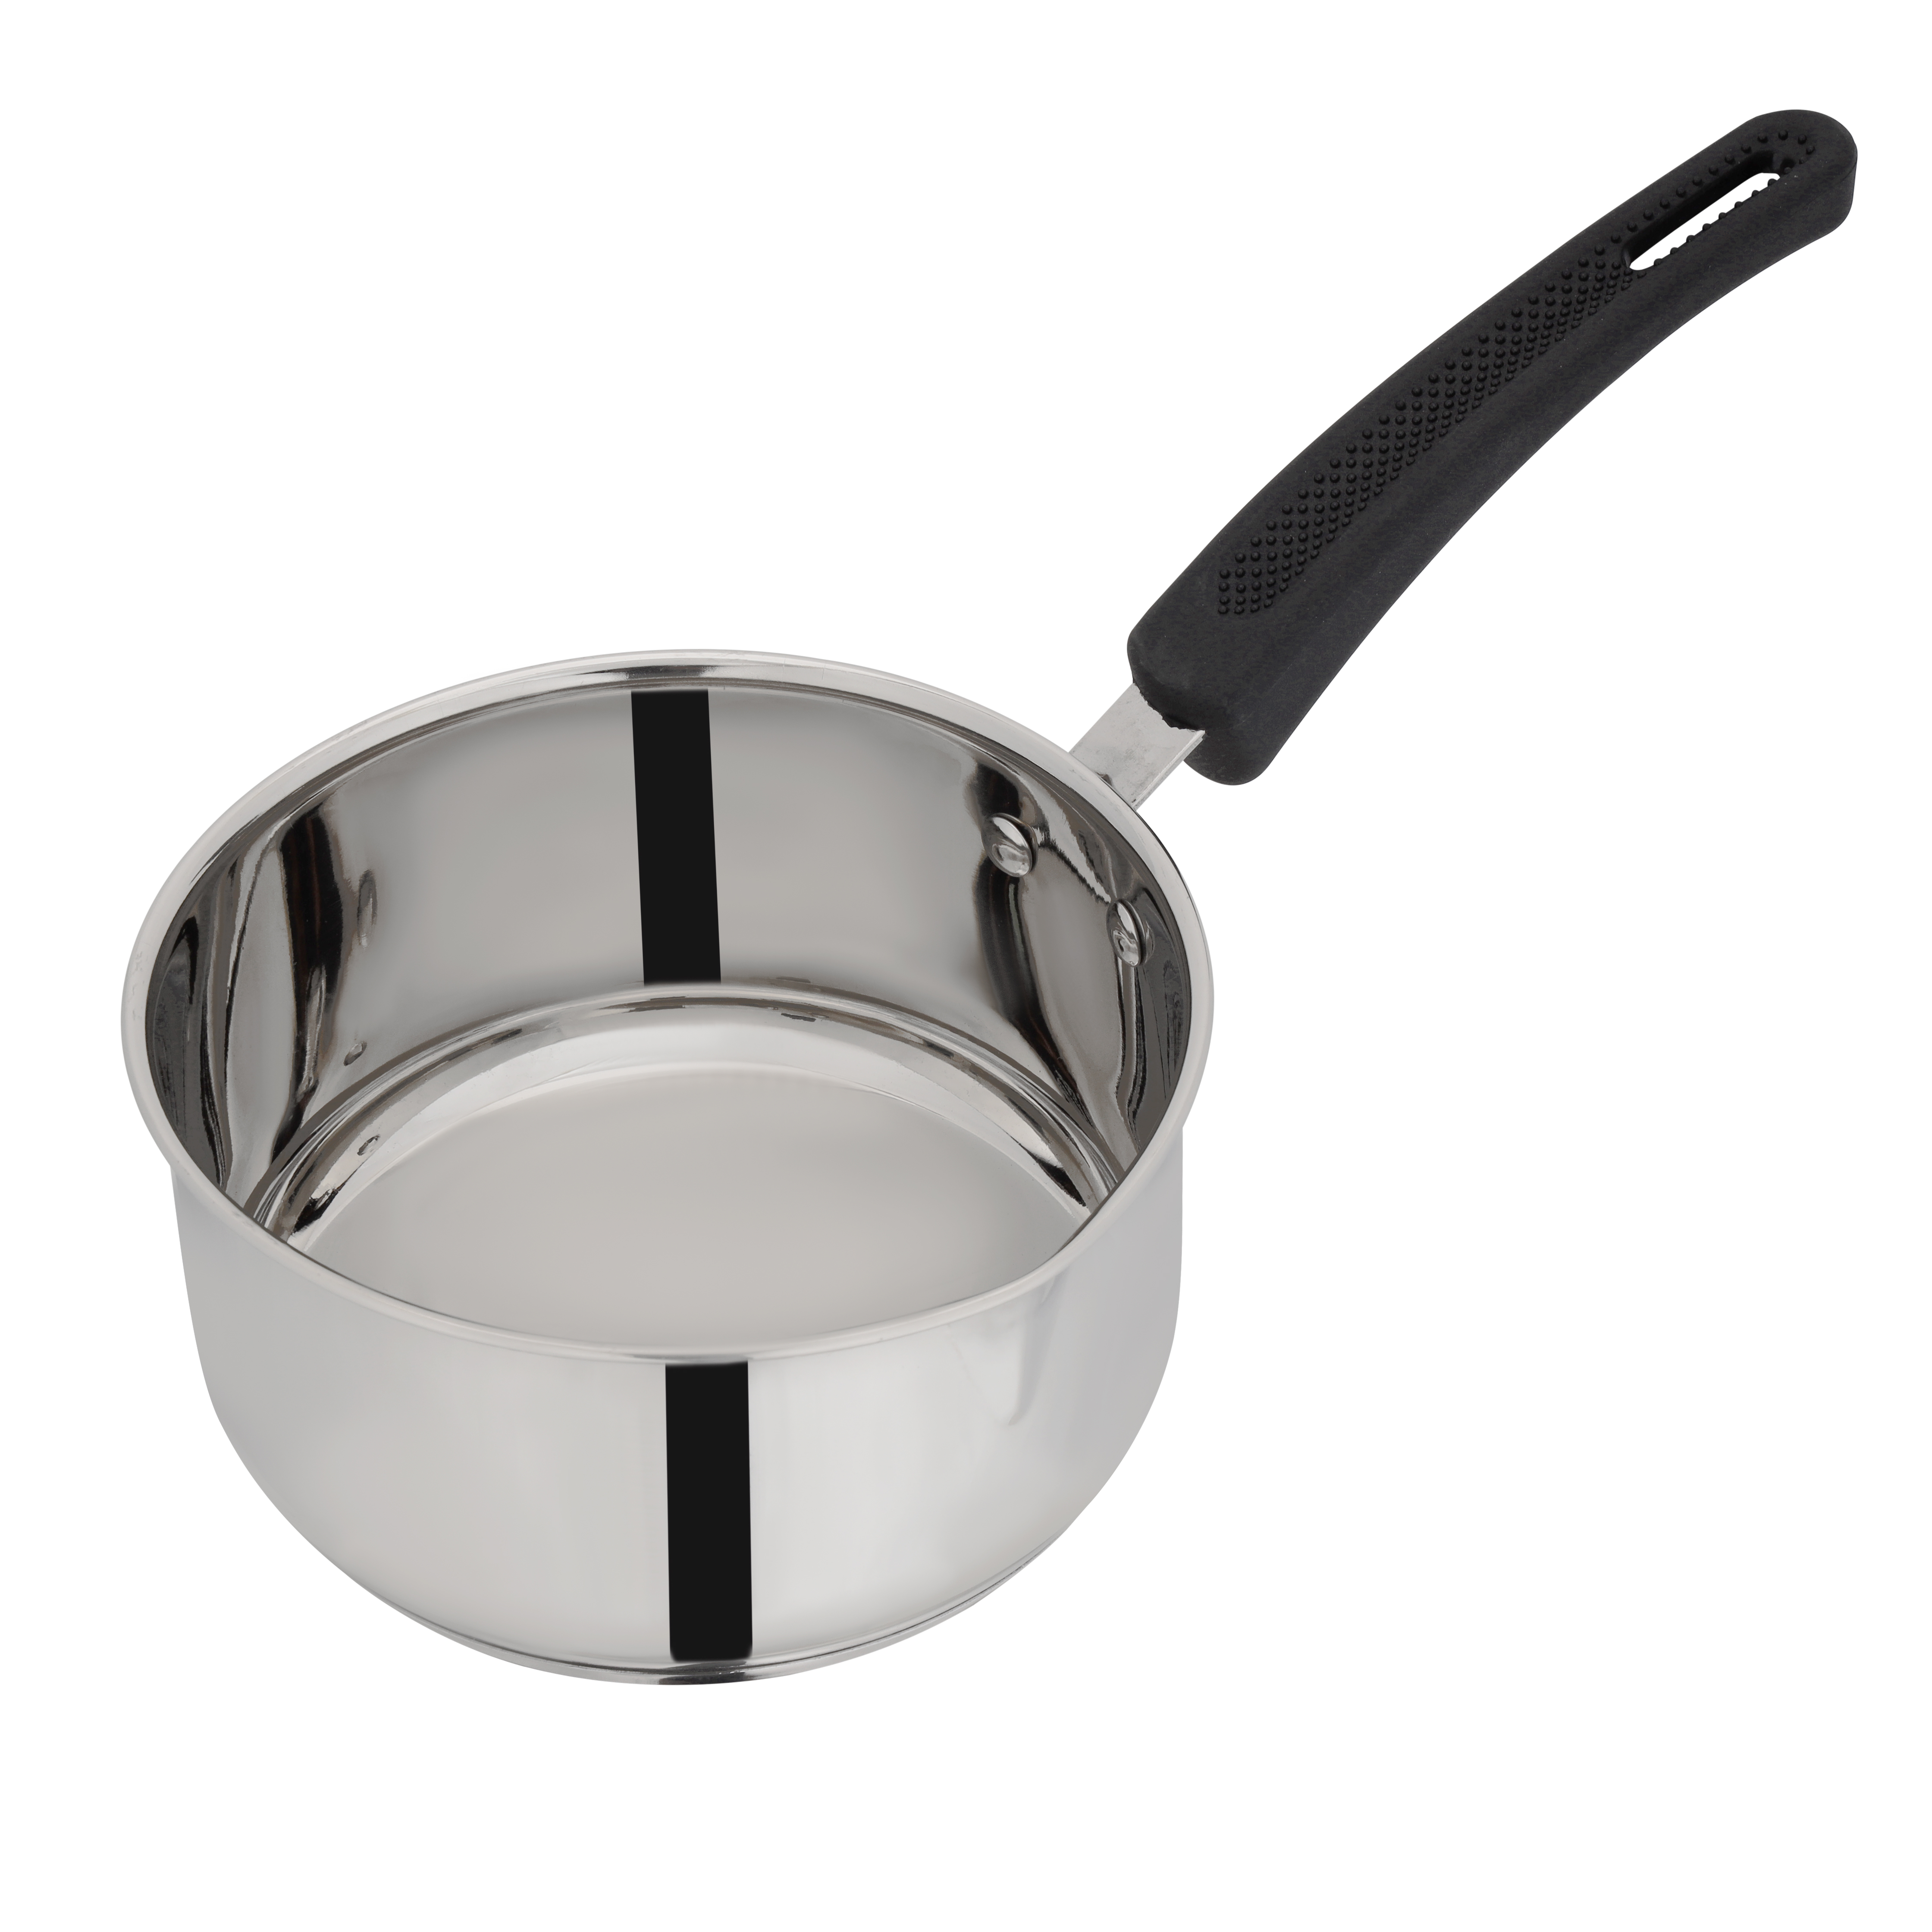 Stainless Steel Sauce Pan - Induction Ready - Round - Silver - 6.5